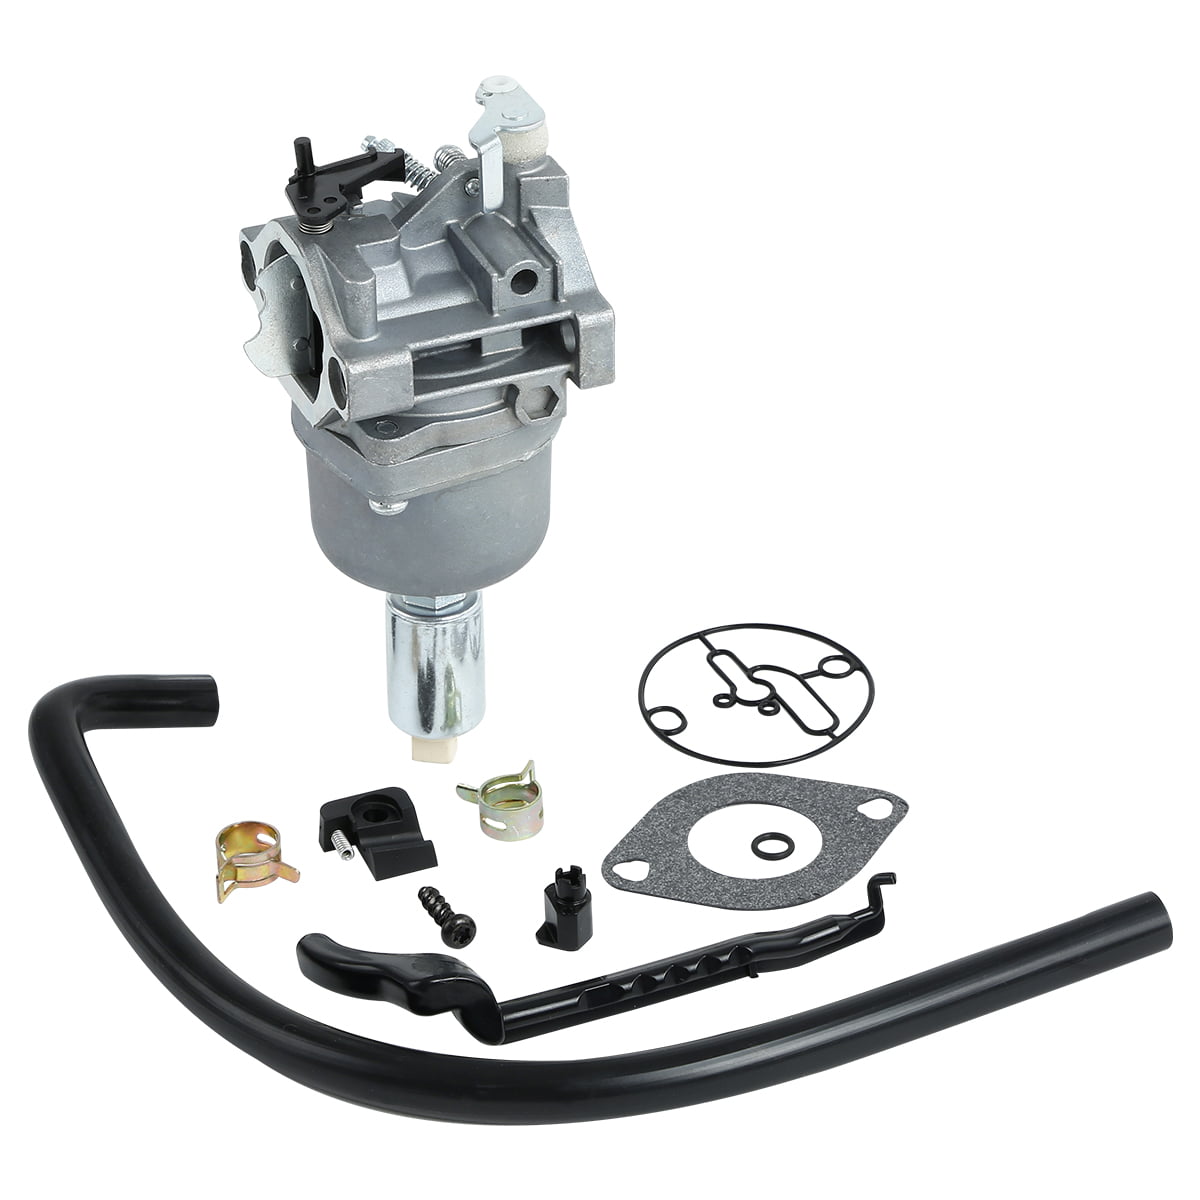 Butom 799727 Carburetor for Briggs and Stratton 791886 495935 690194 498061 499153 698620 496796 498051 695412 498059 Engines with 496894S 496894 Air Filter Tune Up Kit 